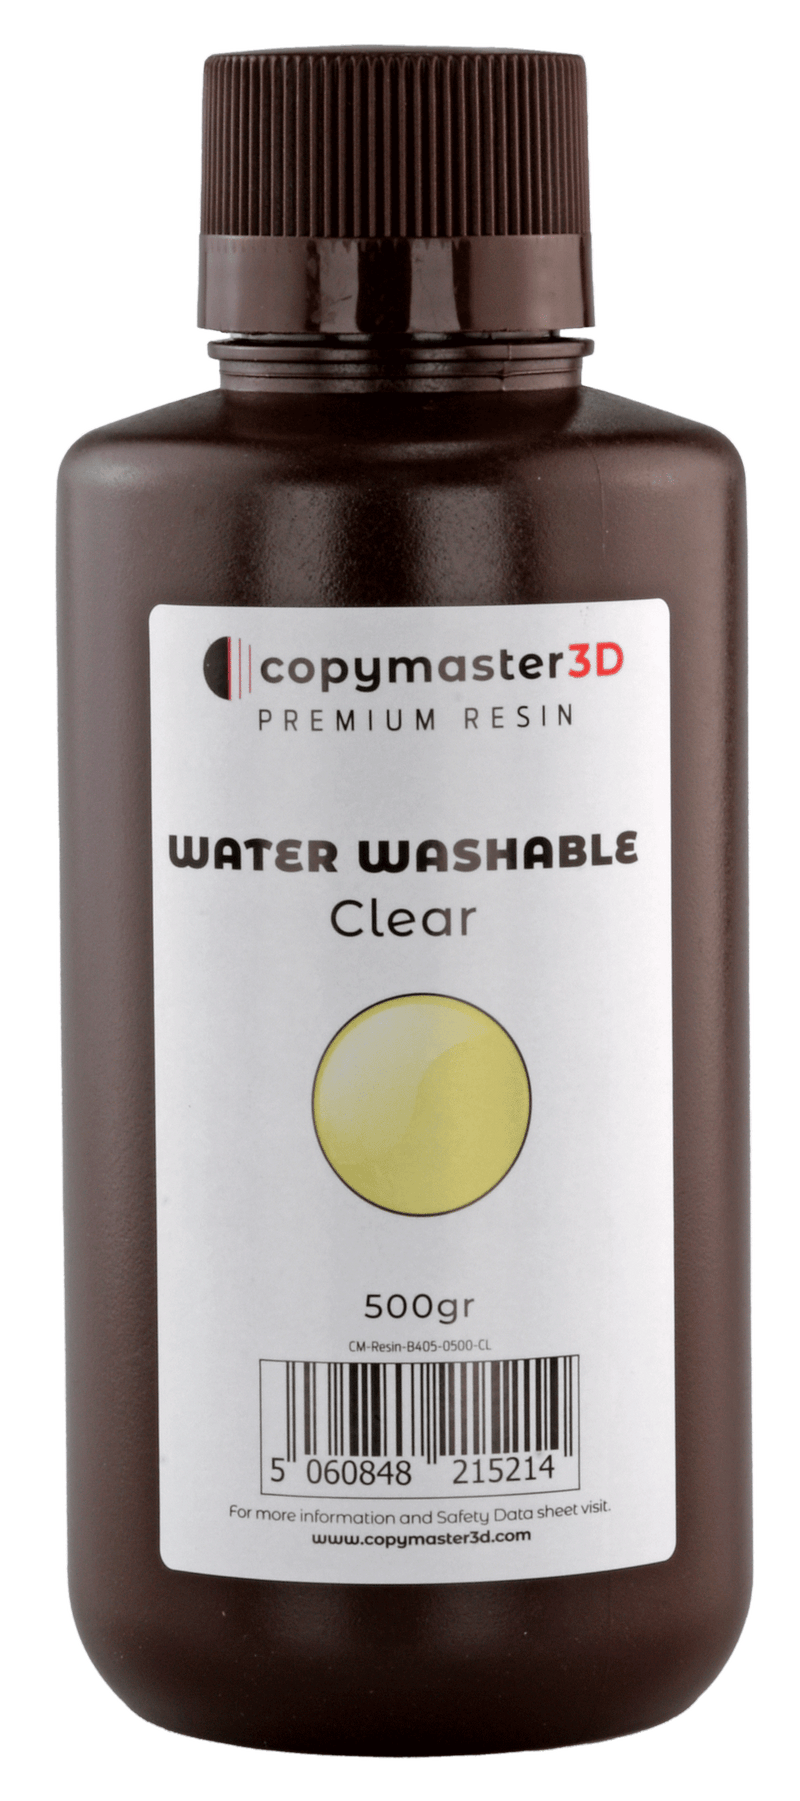 Copymaster3D Water Washable UV Resin - 500 ml - Clear